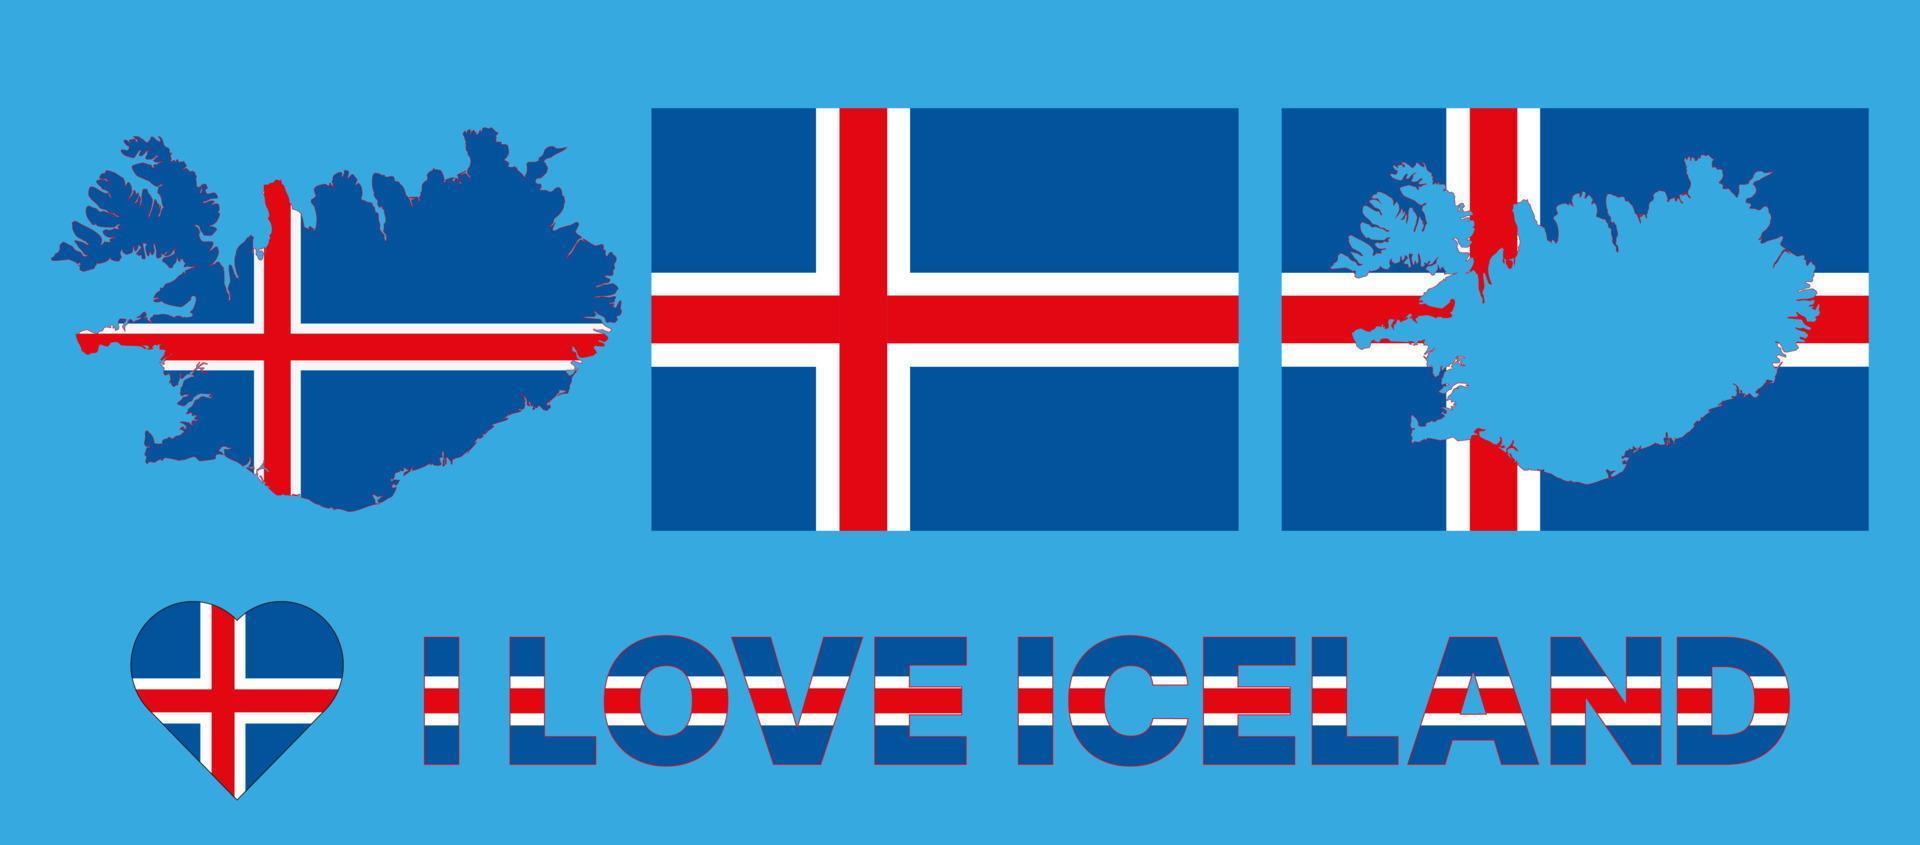 Set of vector illustrations with Iceland flag, country outline map and heart. Travel concept.